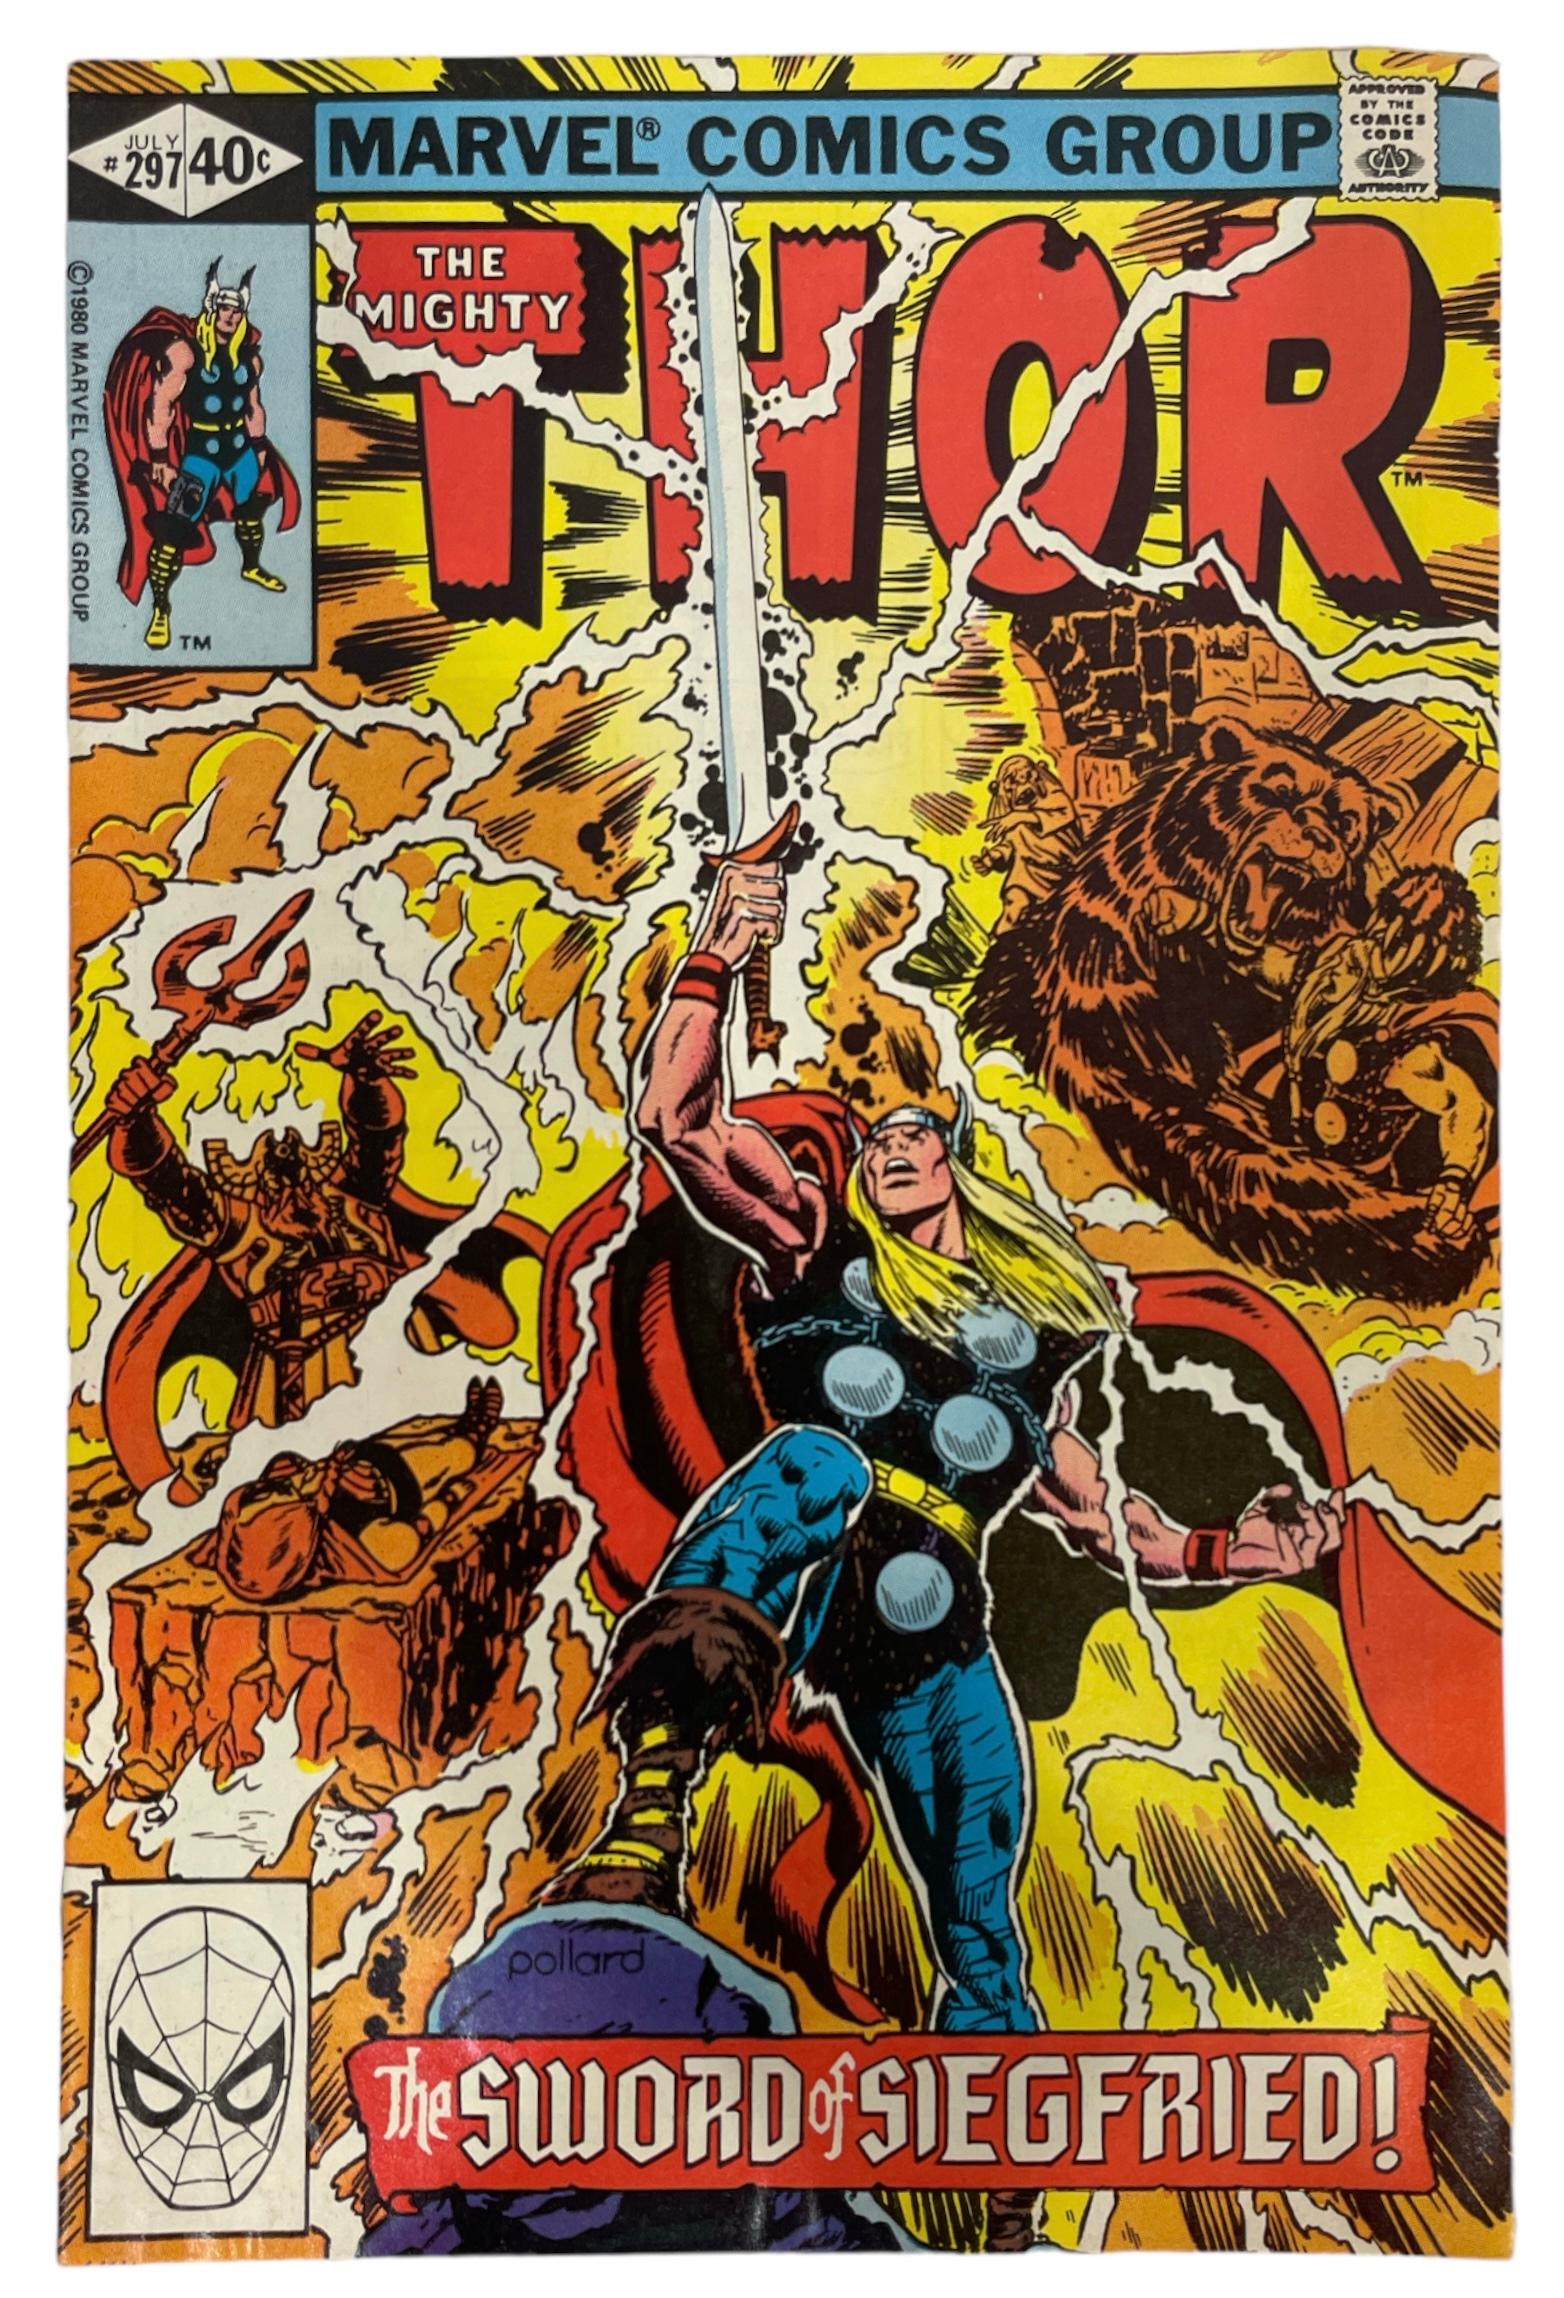 Vintage Marvel Comics - The Mighty Thor Series No.200, 201, and 297